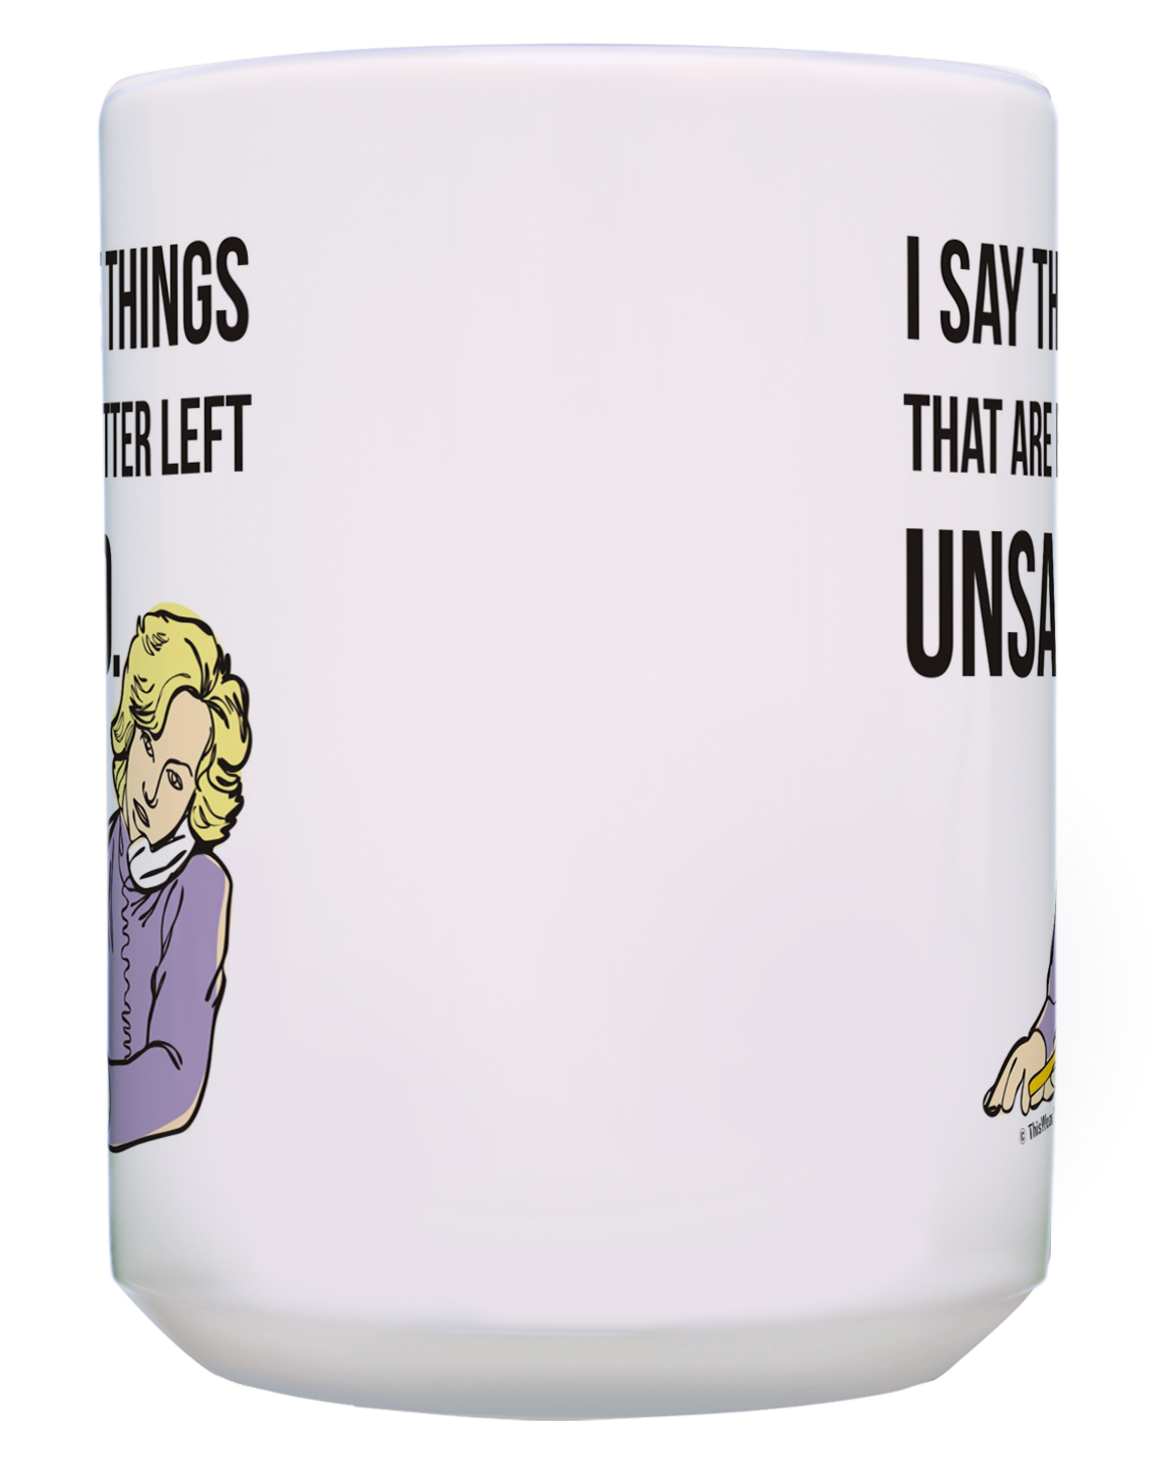 ThisWear Humor Coffee Mug I Say the Things That Are Better Left Unsaid Funny Coffee Mugs Sarcasm Cup Funny Coffee Cups for Women and Men Gift 15oz Coffee Mug - image 3 of 4